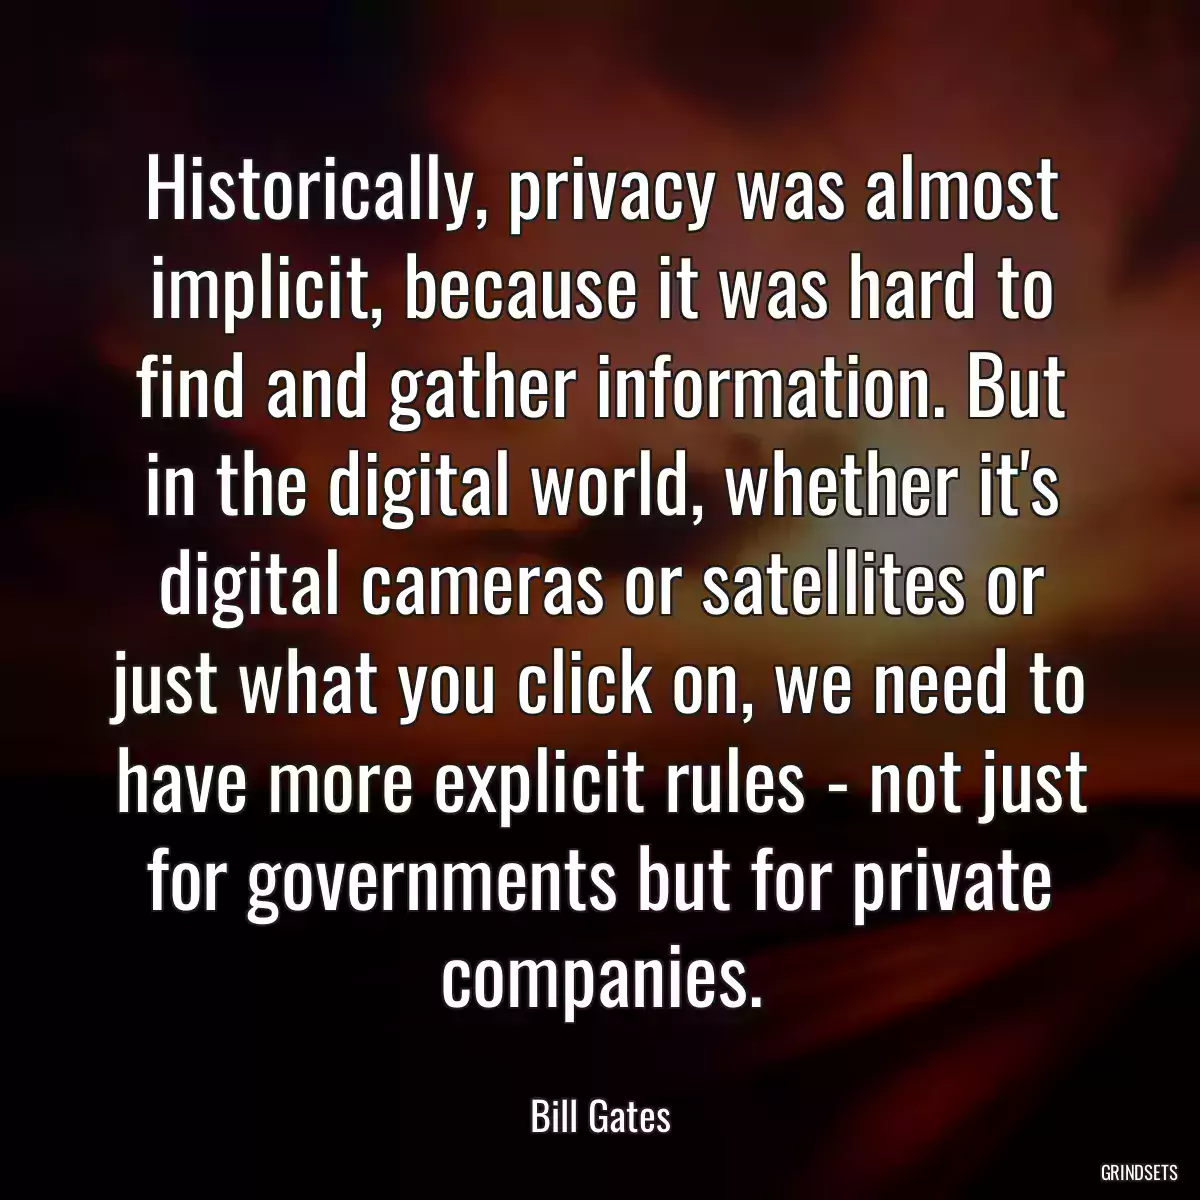 Historically, privacy was almost implicit, because it was hard to find and gather information. But in the digital world, whether it\'s digital cameras or satellites or just what you click on, we need to have more explicit rules - not just for governments but for private companies.